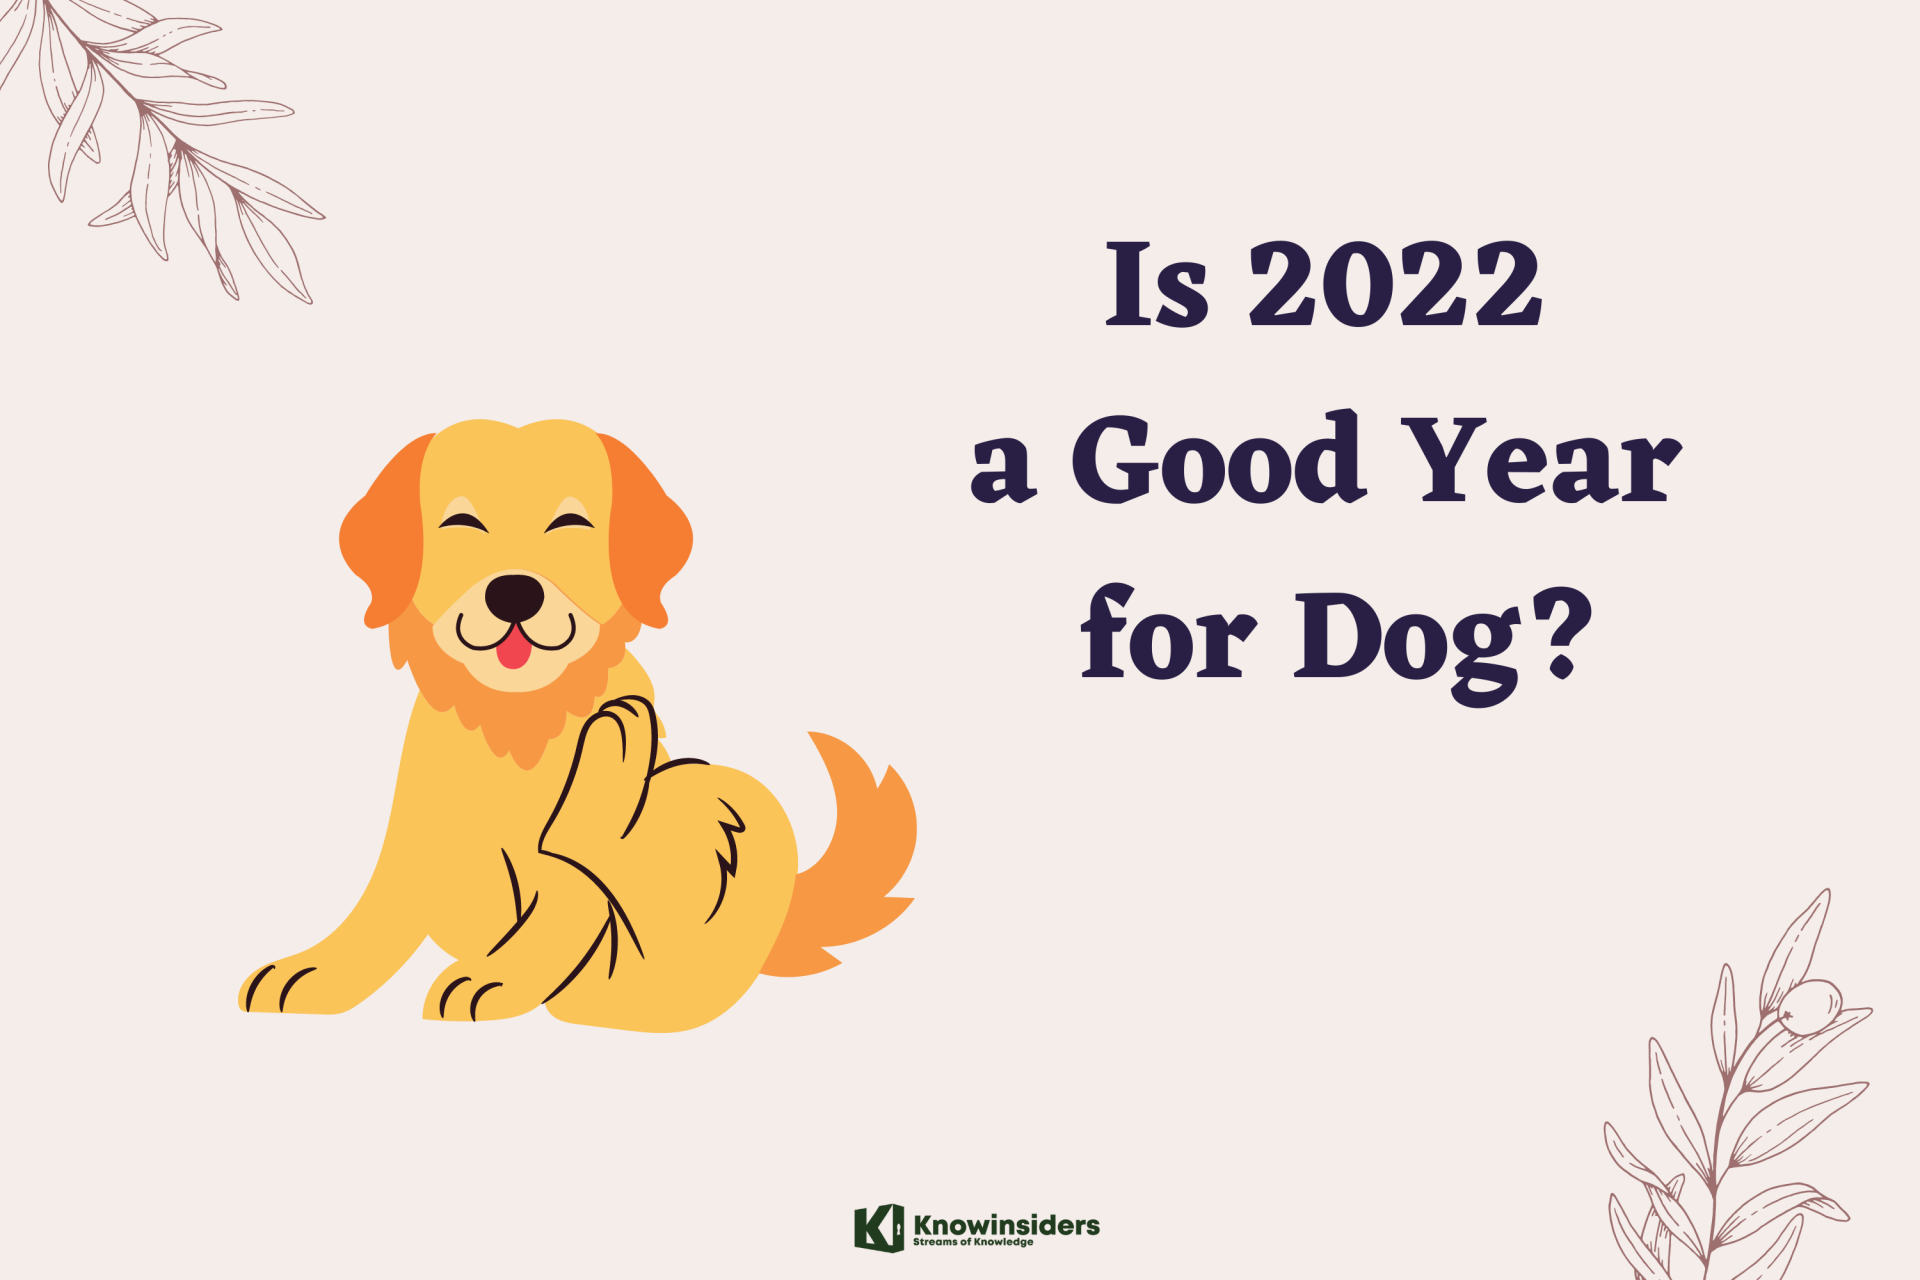 Is 2022 A Good Year for Dog?